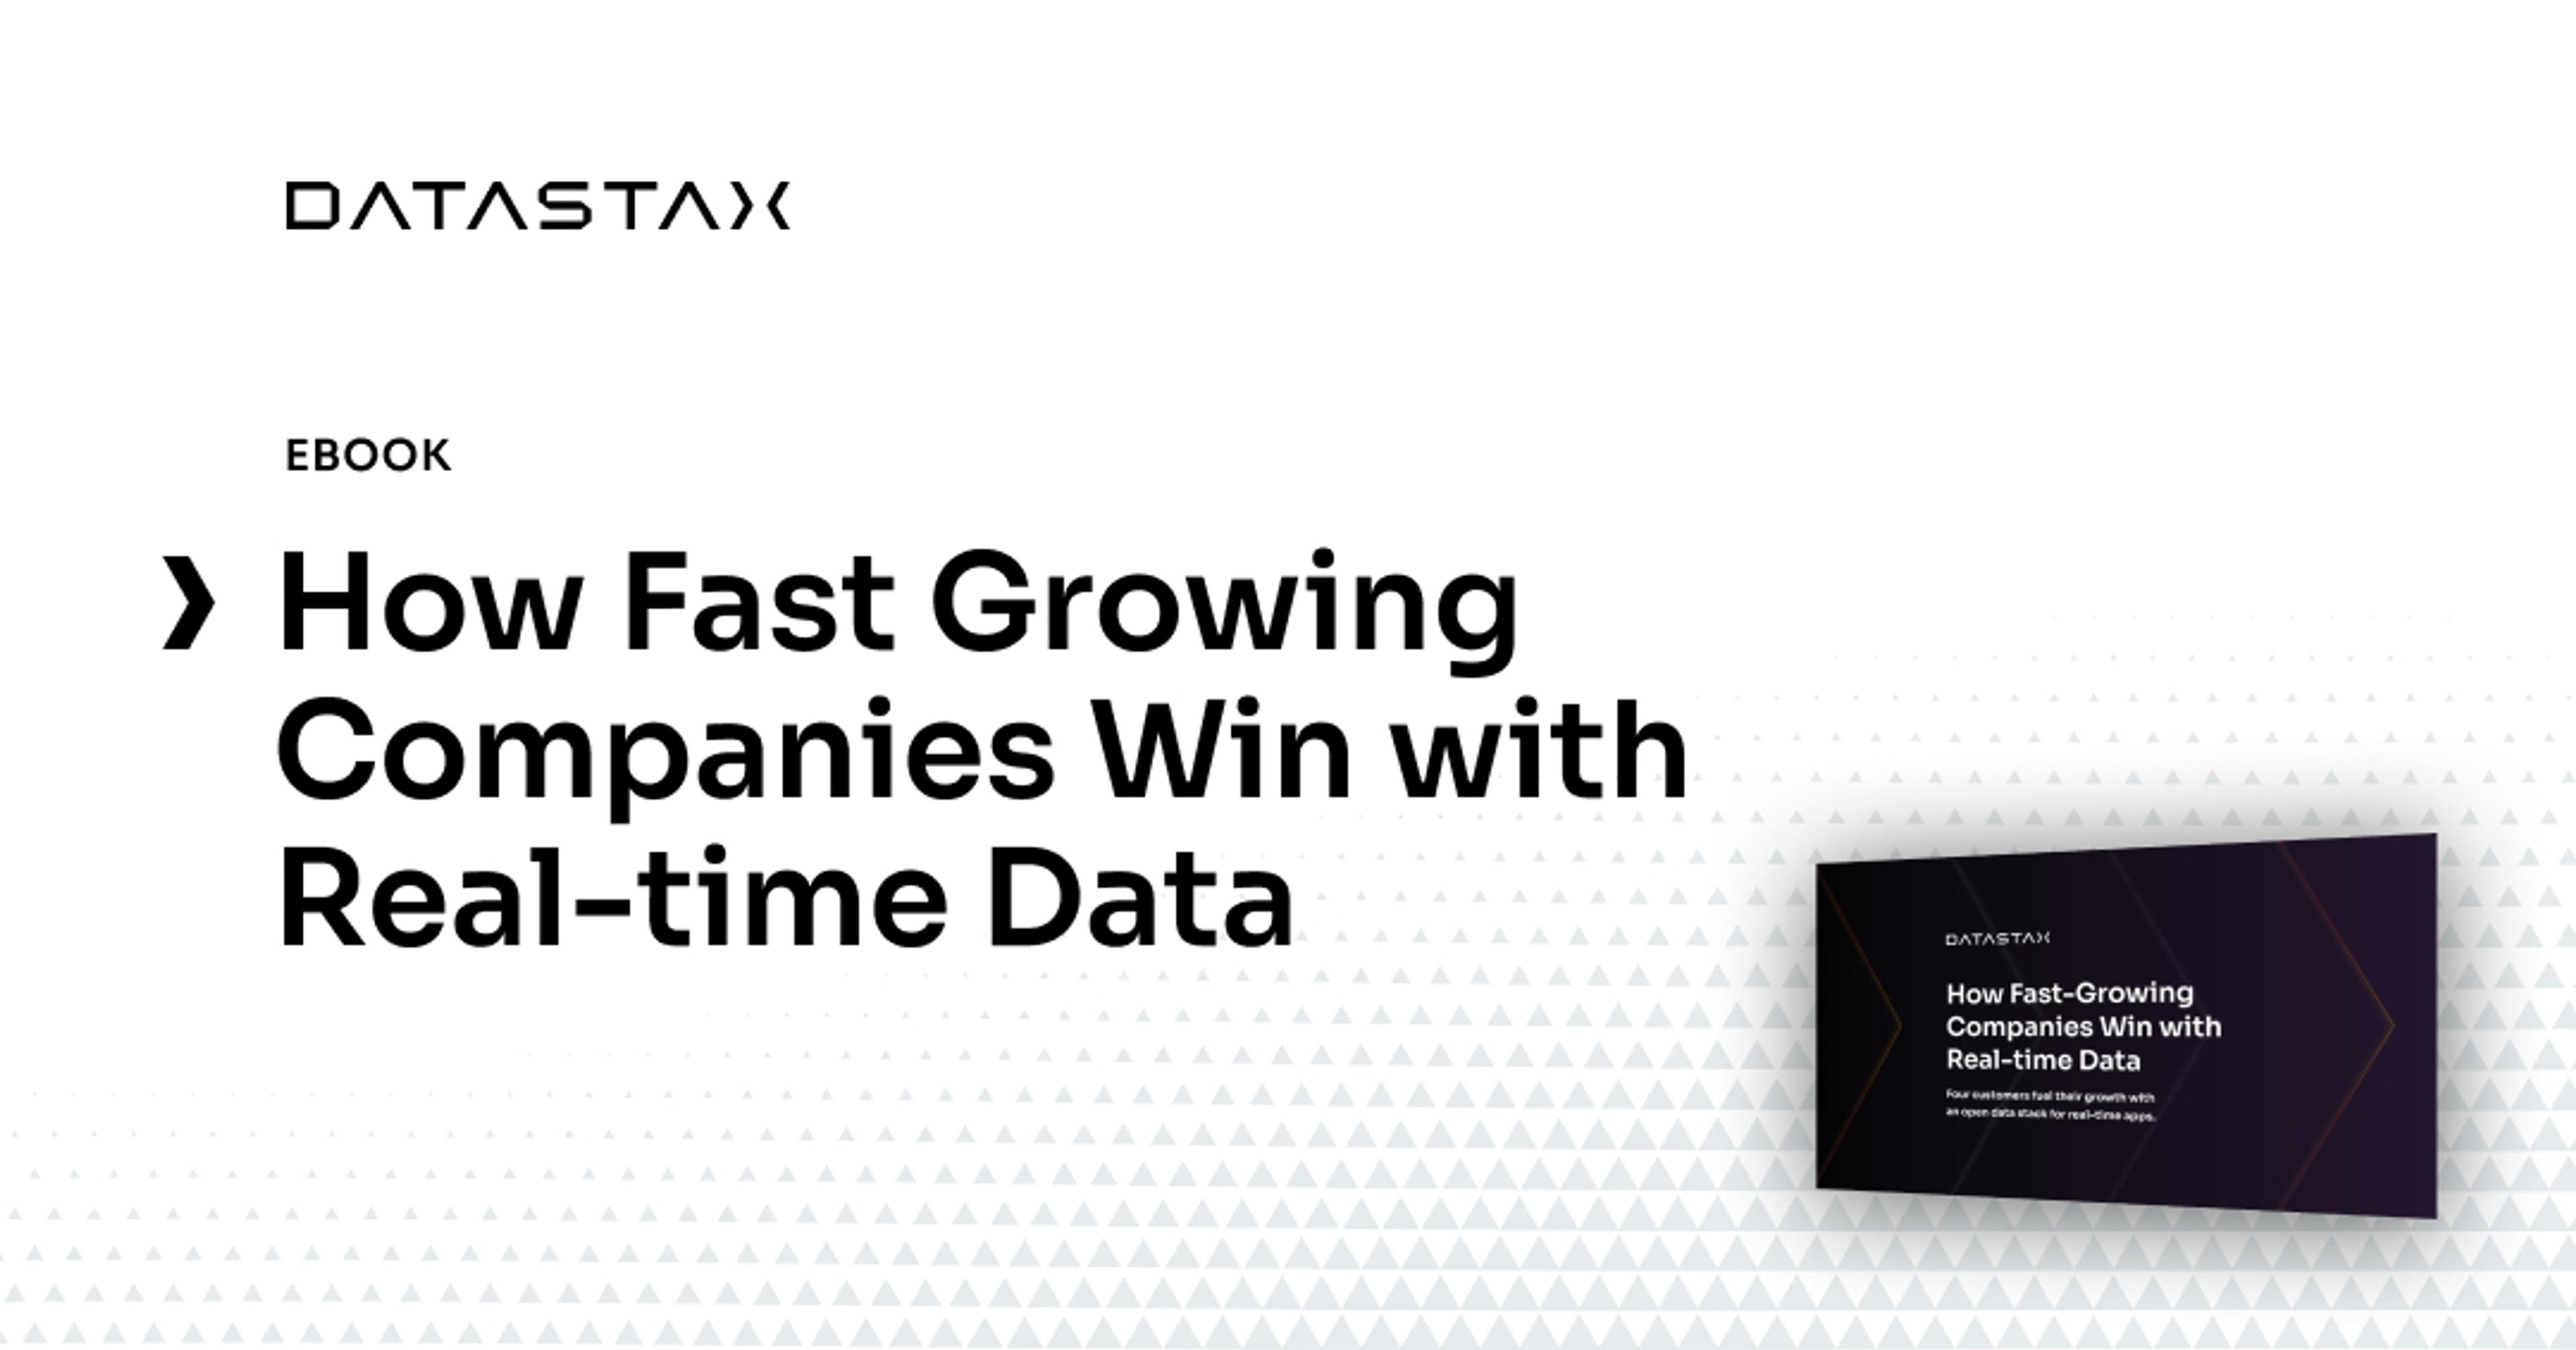 How Fast-Growing Companies Win with Real-time Data